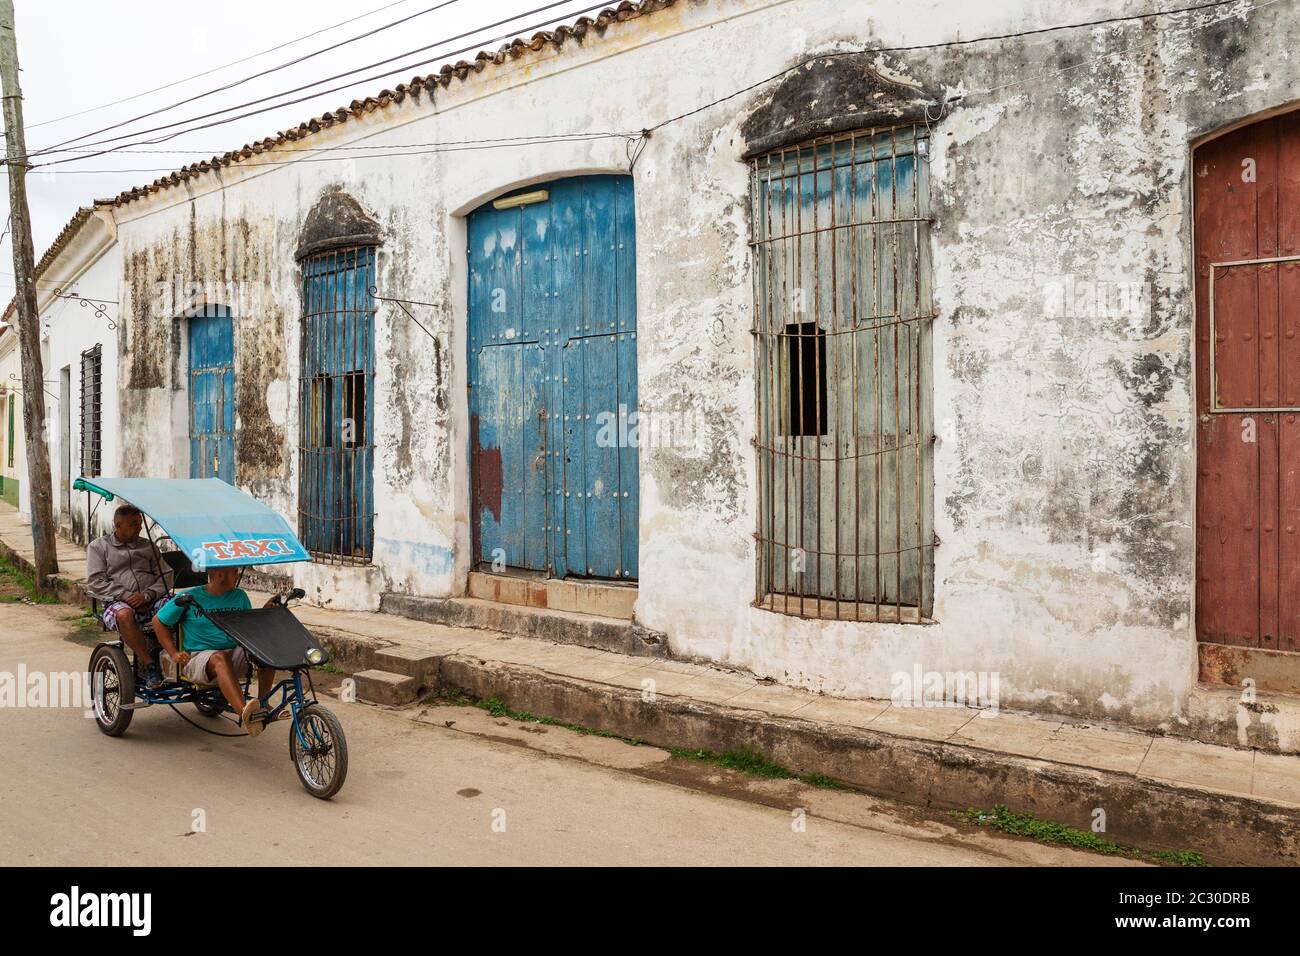 Bicycle taxi driving past decayed facades of crumbling plaster and weathered wooden doors, Remedios, Cuba Stock Photo